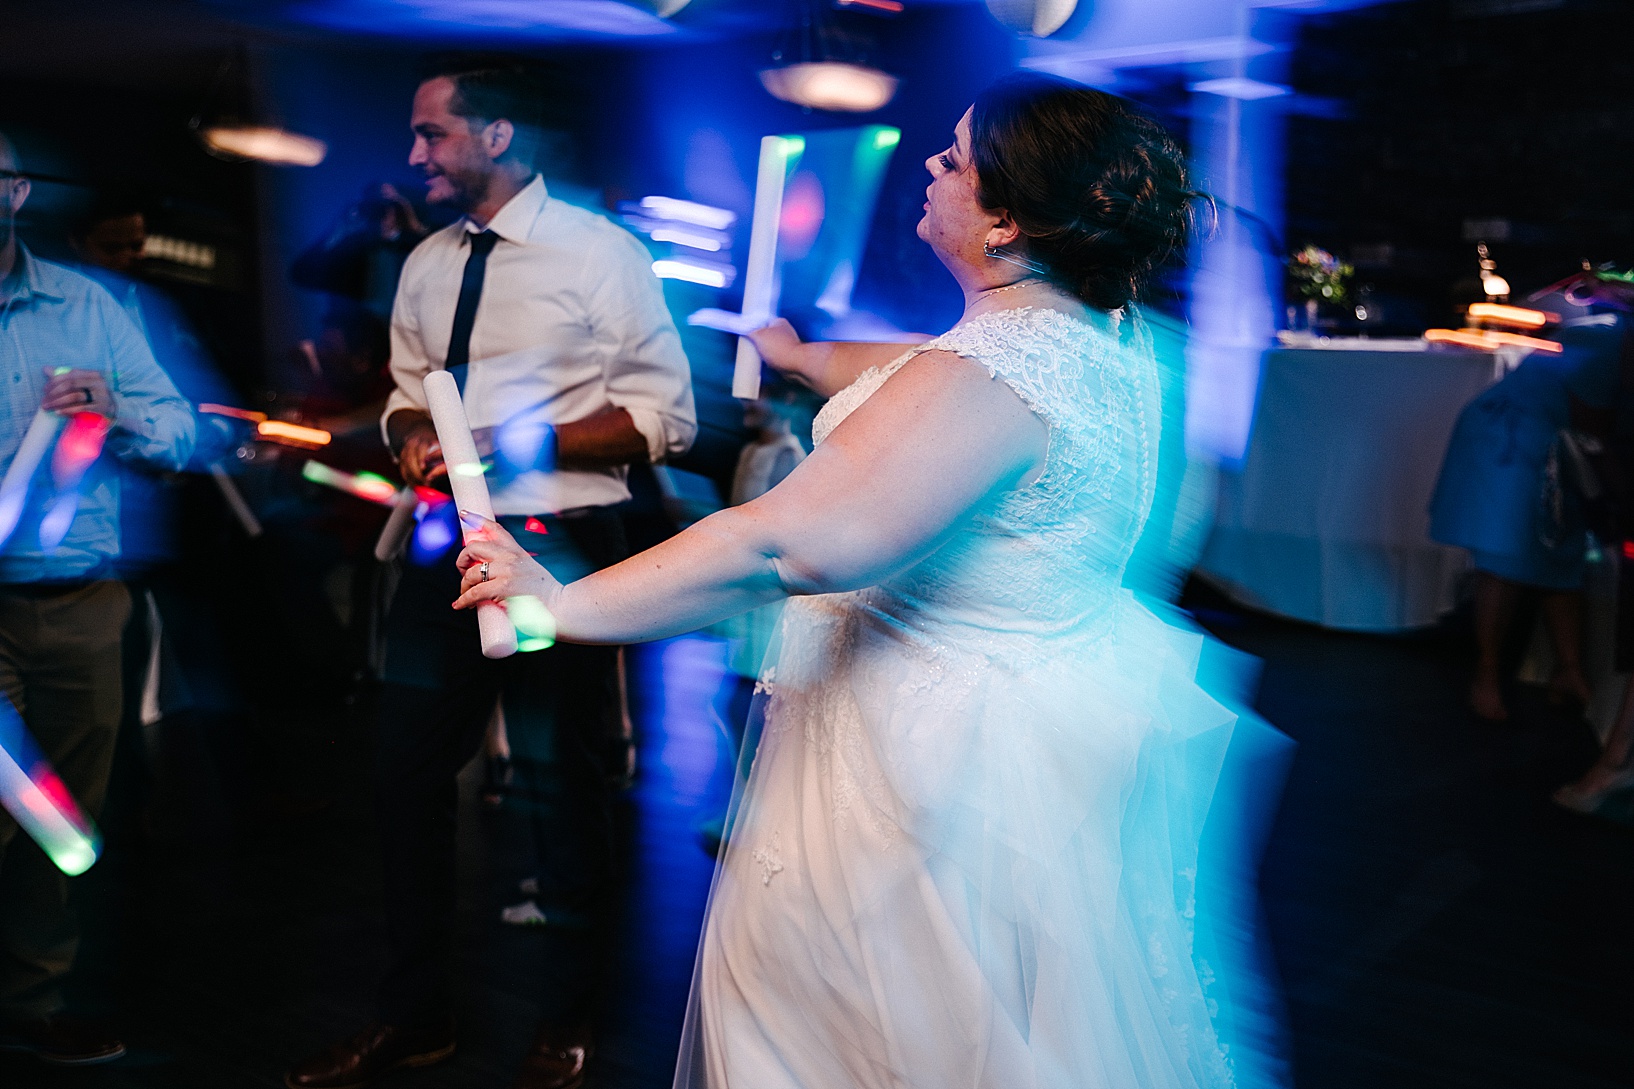 Out of focus image of bride dancing on the dance floor in neon light at post wedding celebration